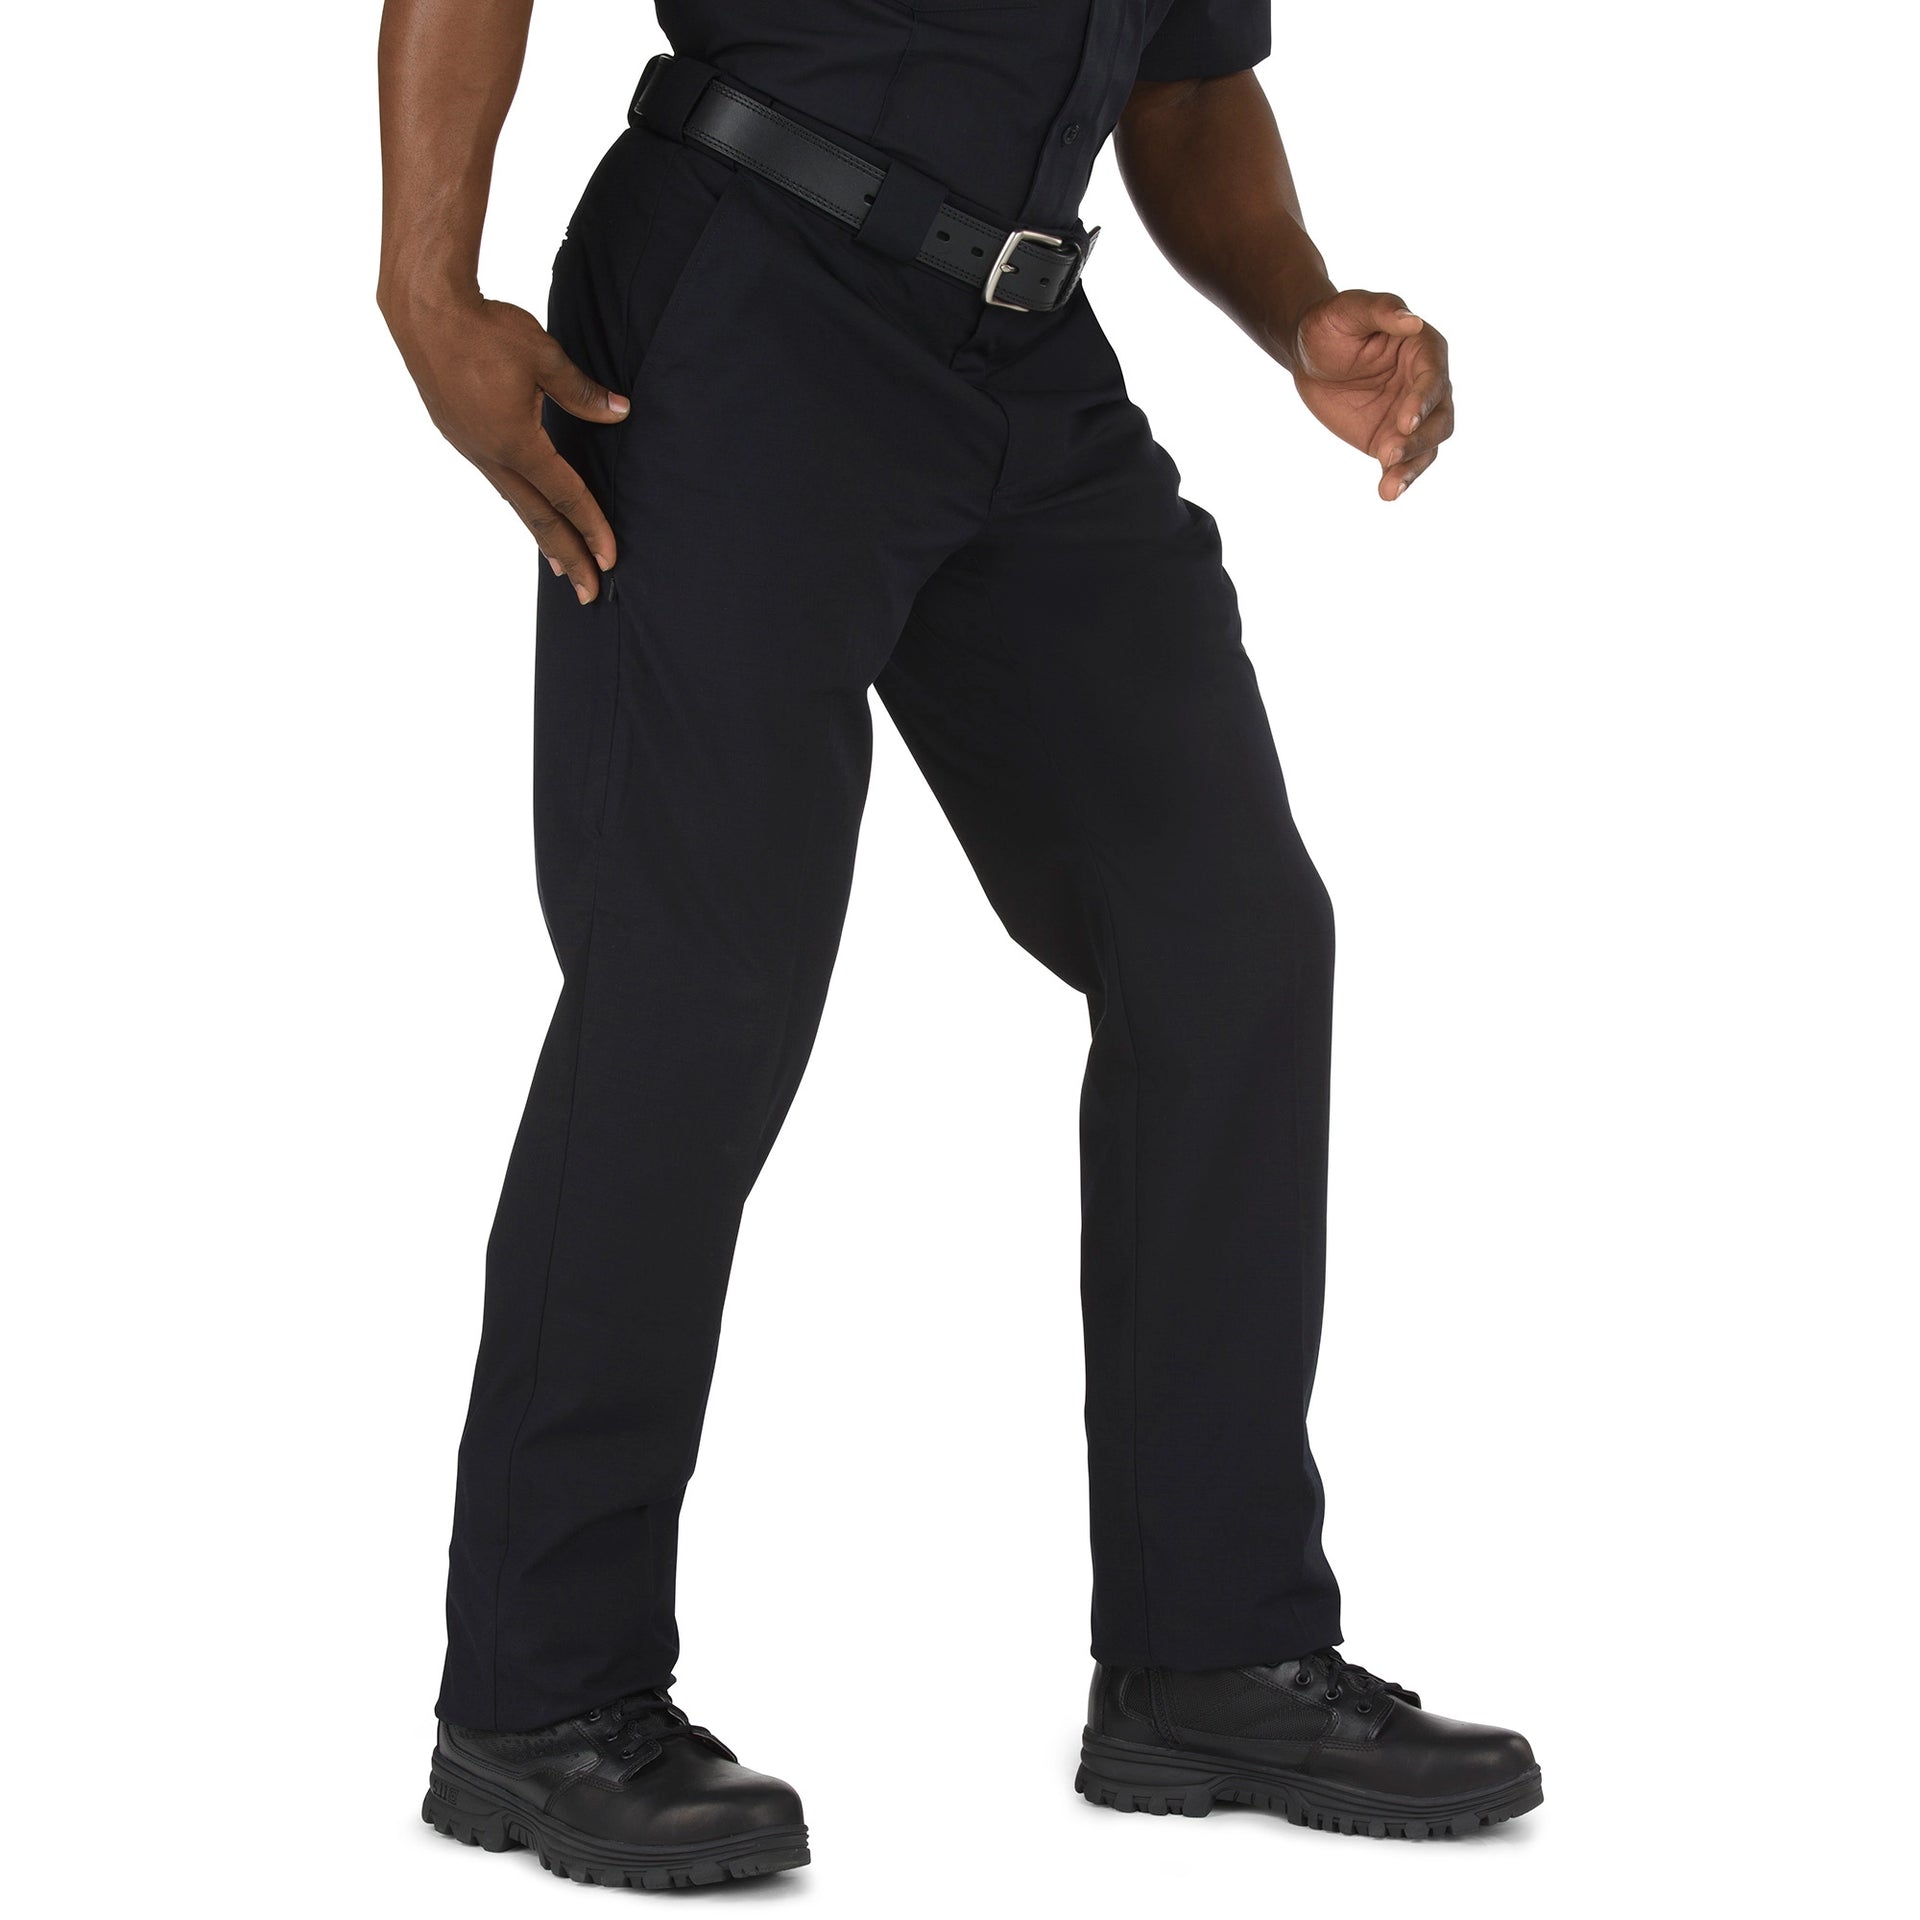 5.11 Tactical Stryke® PDU® Class A Pant (74426) | The Fire Center | Fuego Fire Center | FIREFIGHTER GEAR | Elegant enough for your dress uniform but functional enough for duty wear, the 5.11 Stryke® PDU® Class A Pant takes high performance uniform wear to the next level. 